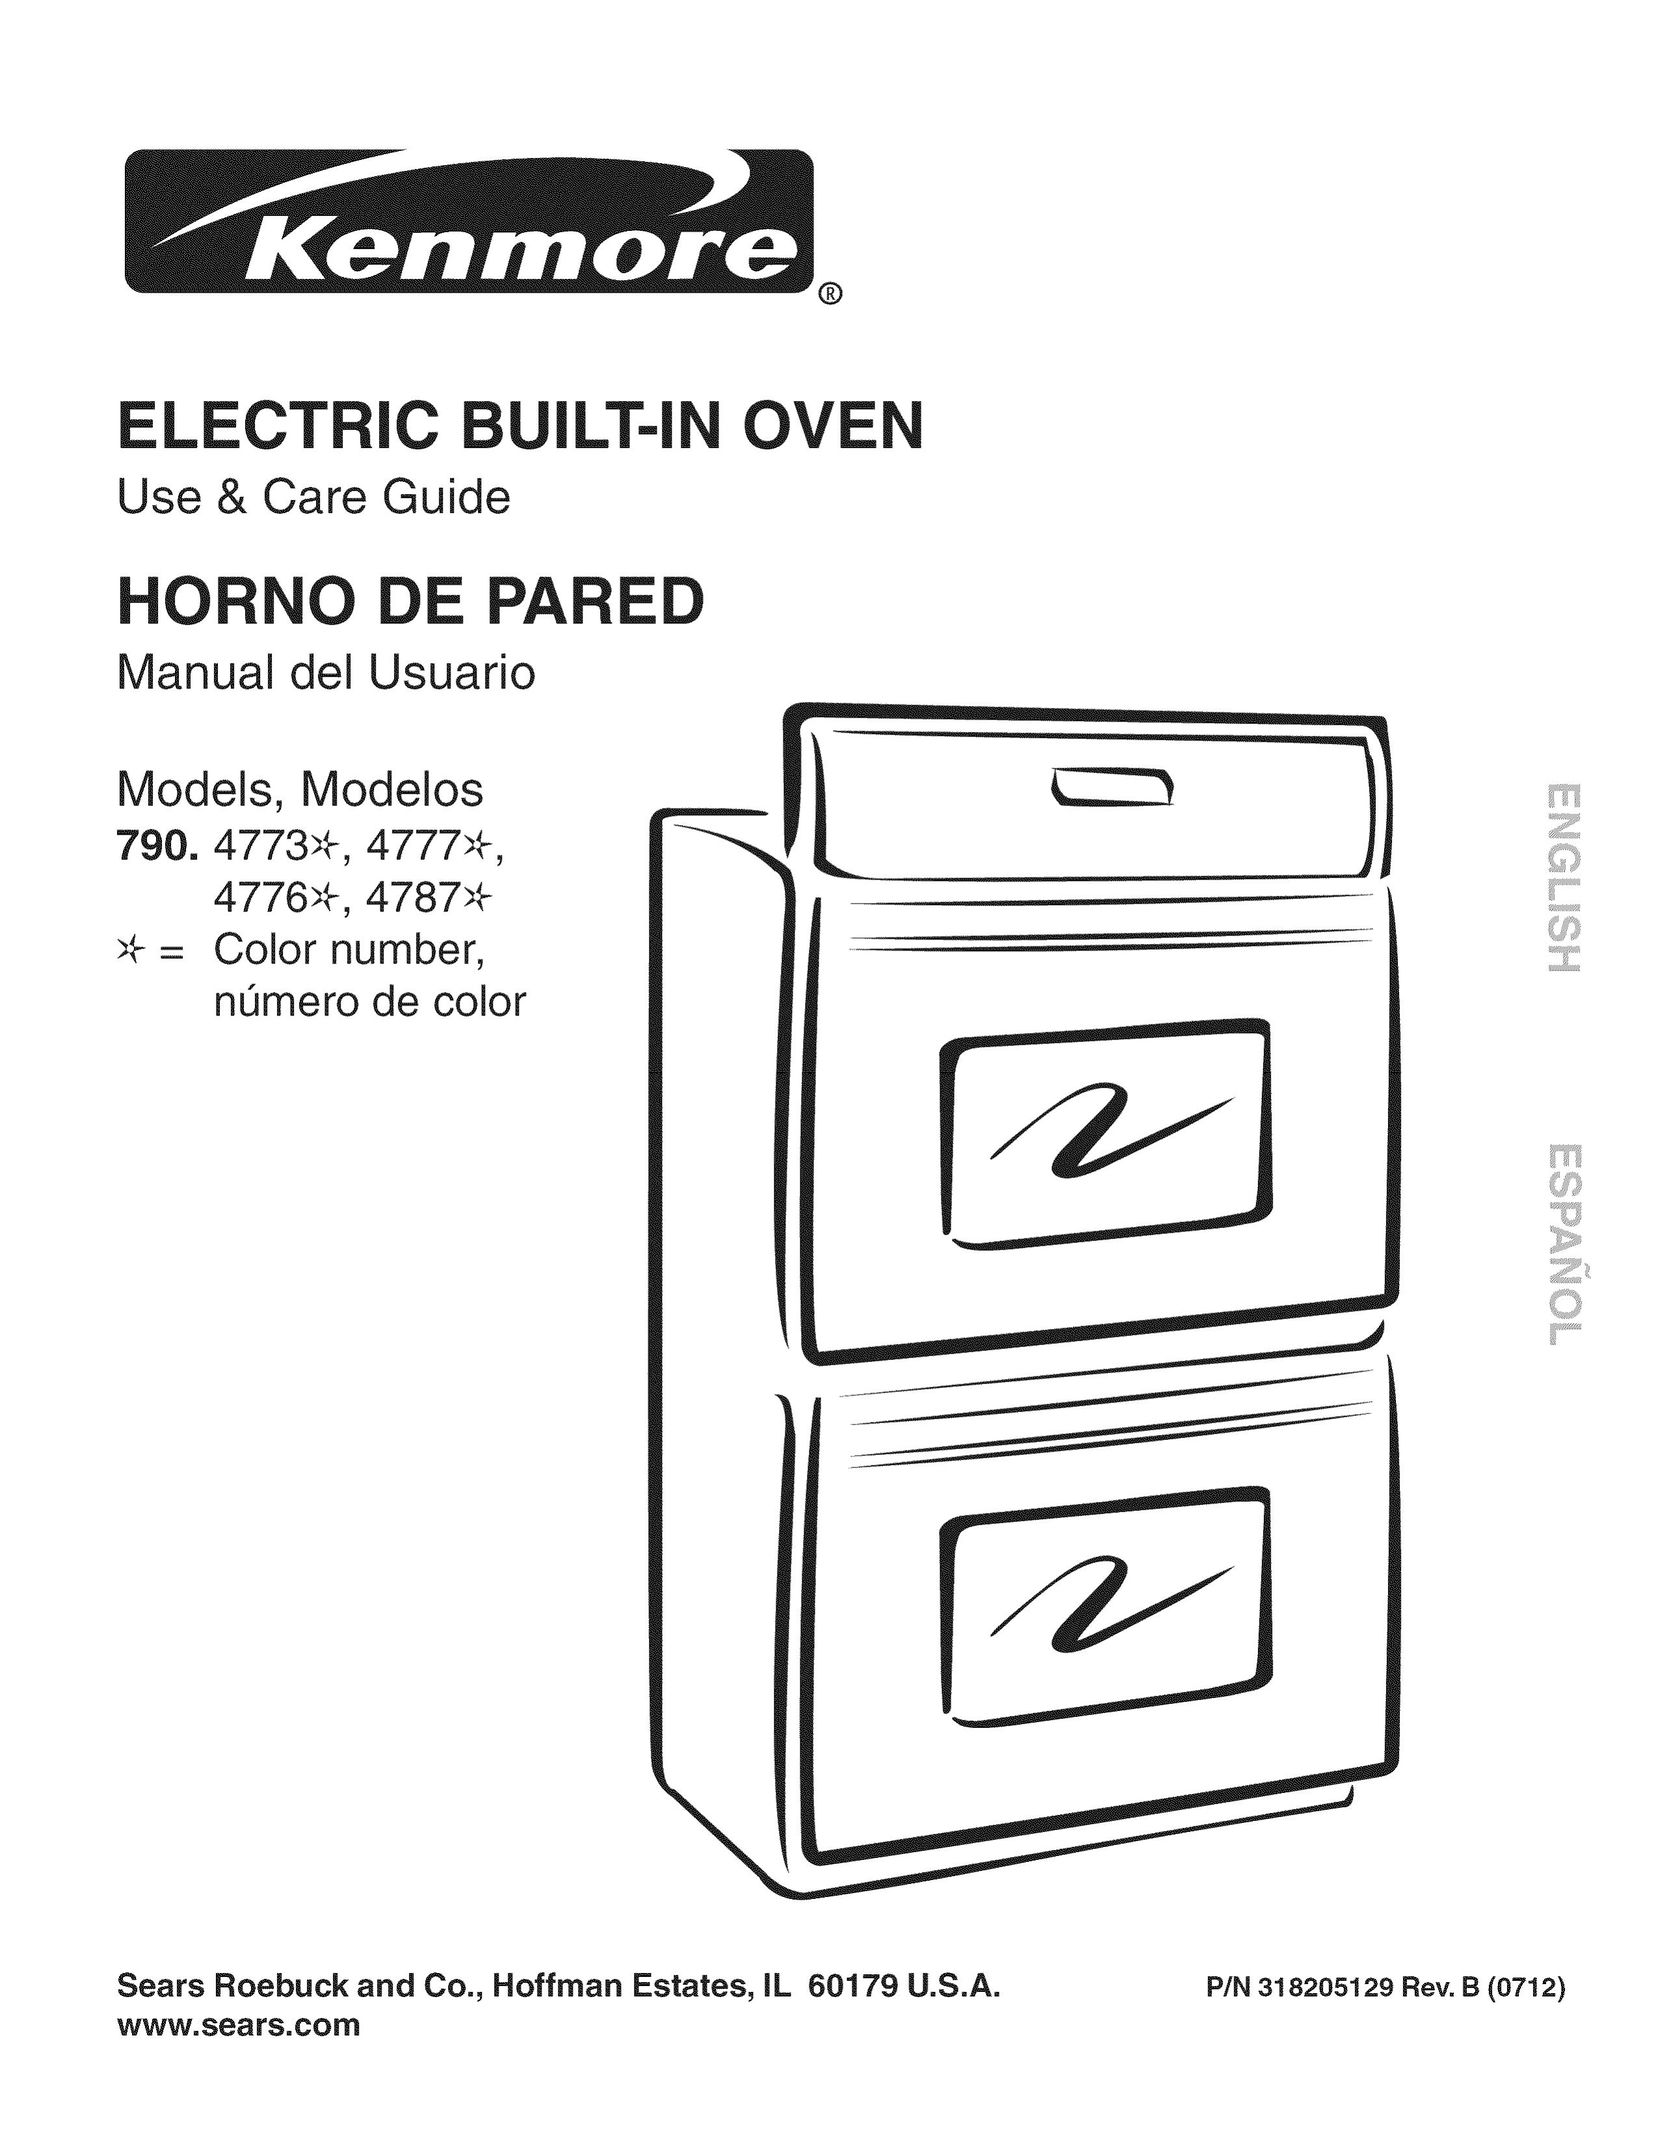 Kenmore 790.4787 Convection Oven User Manual